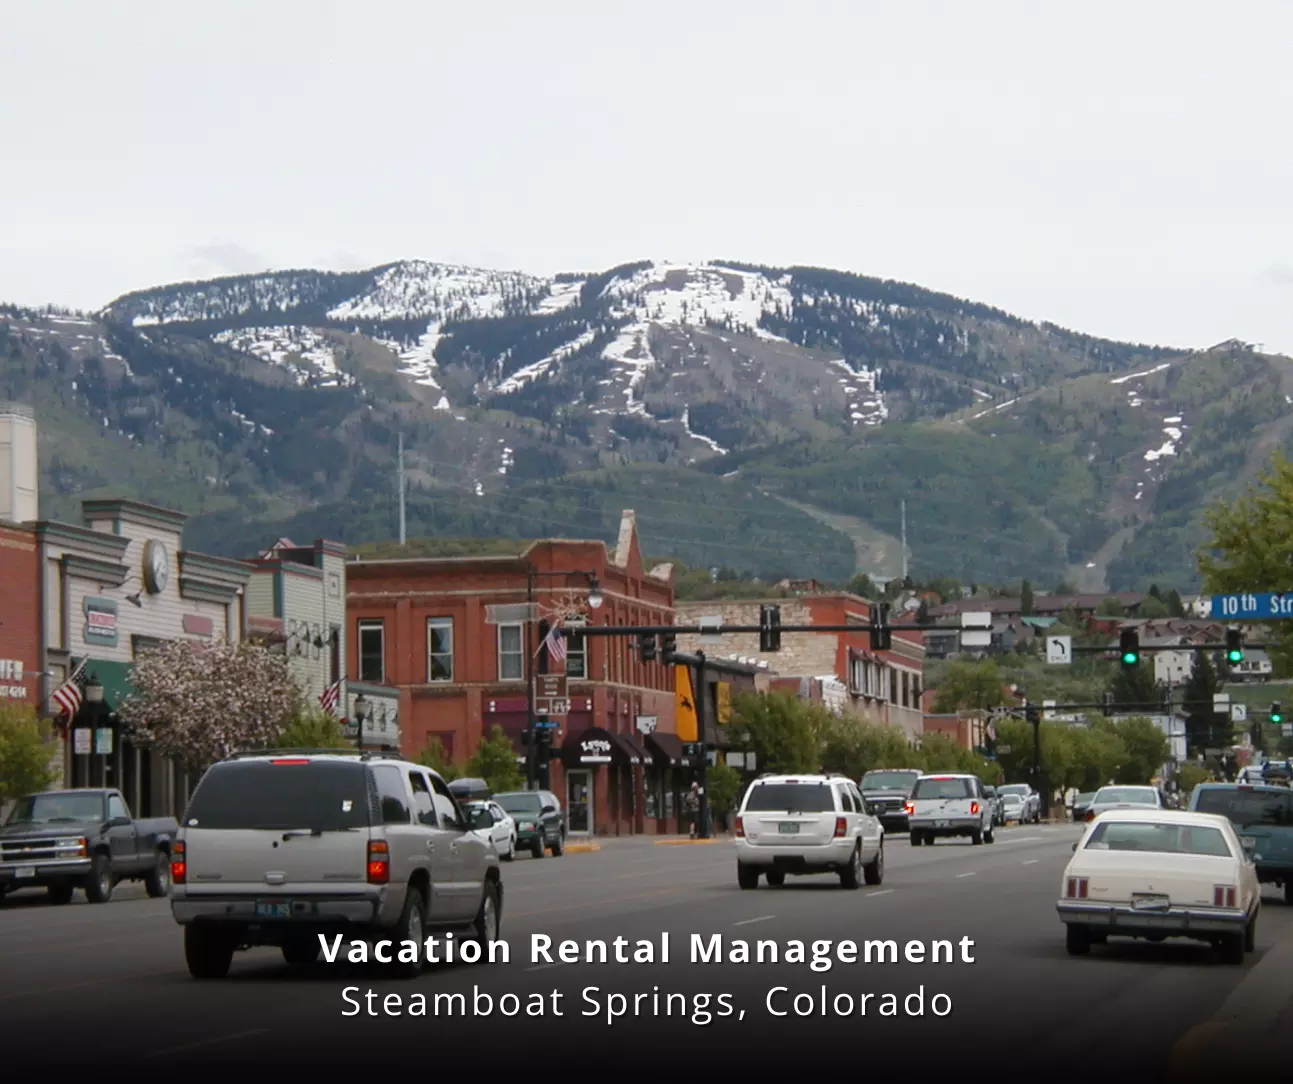 Vacation Rental Management Steamboat Springs Colorado